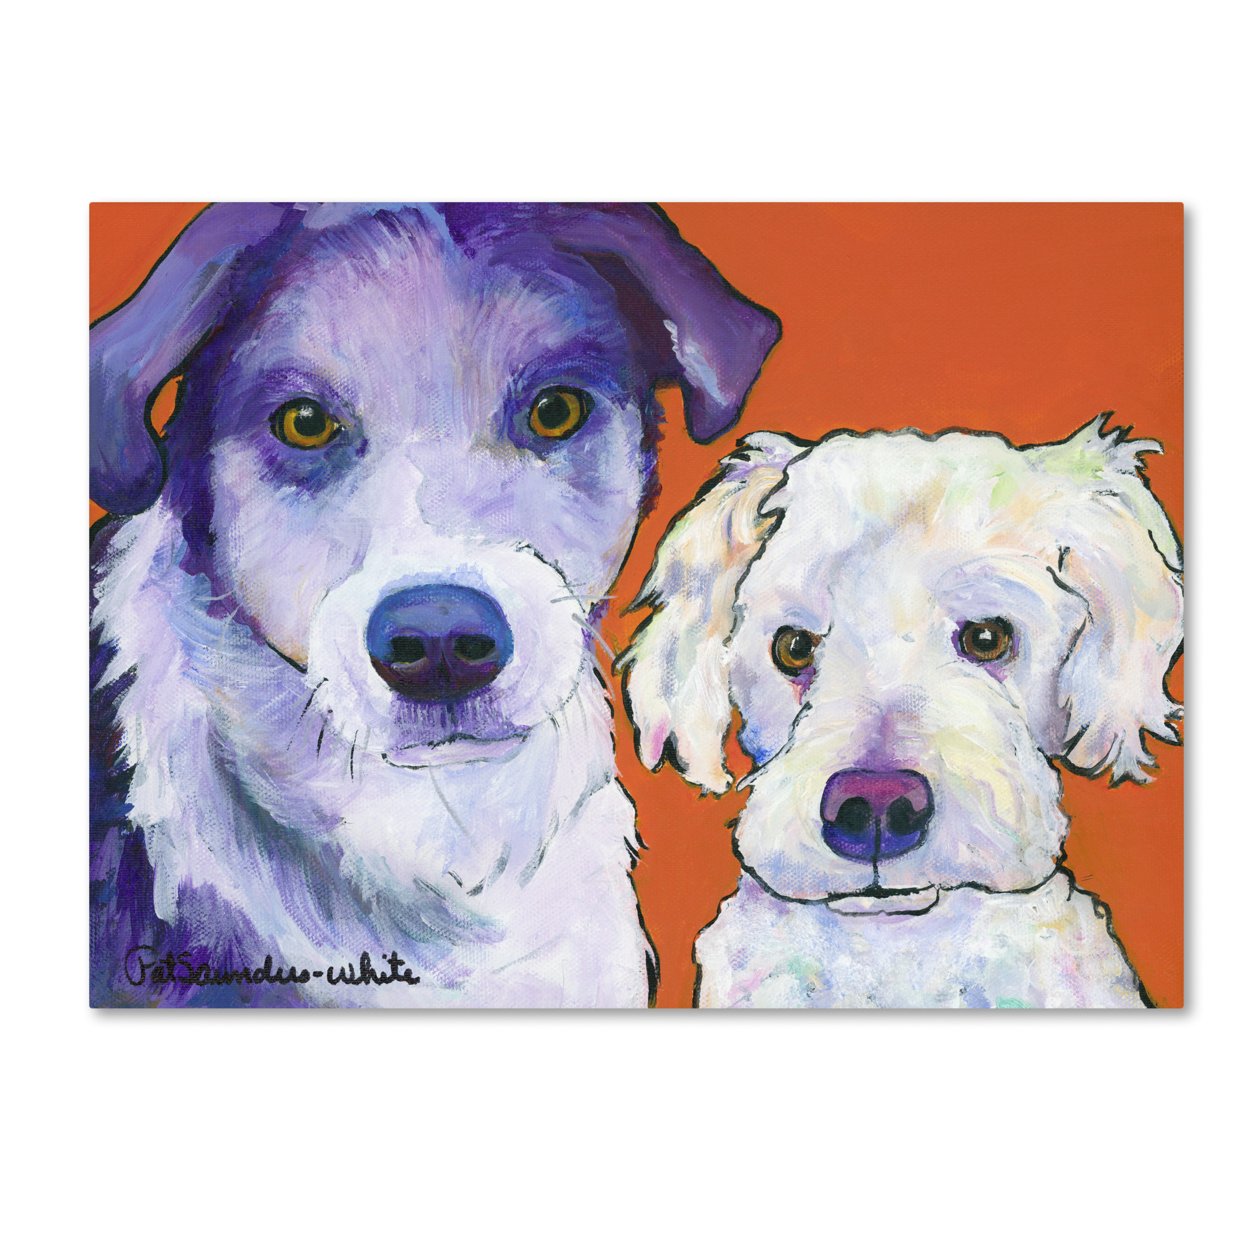 Pat Saunders-White 'Milo And Max' Canvas Art 18 X 24